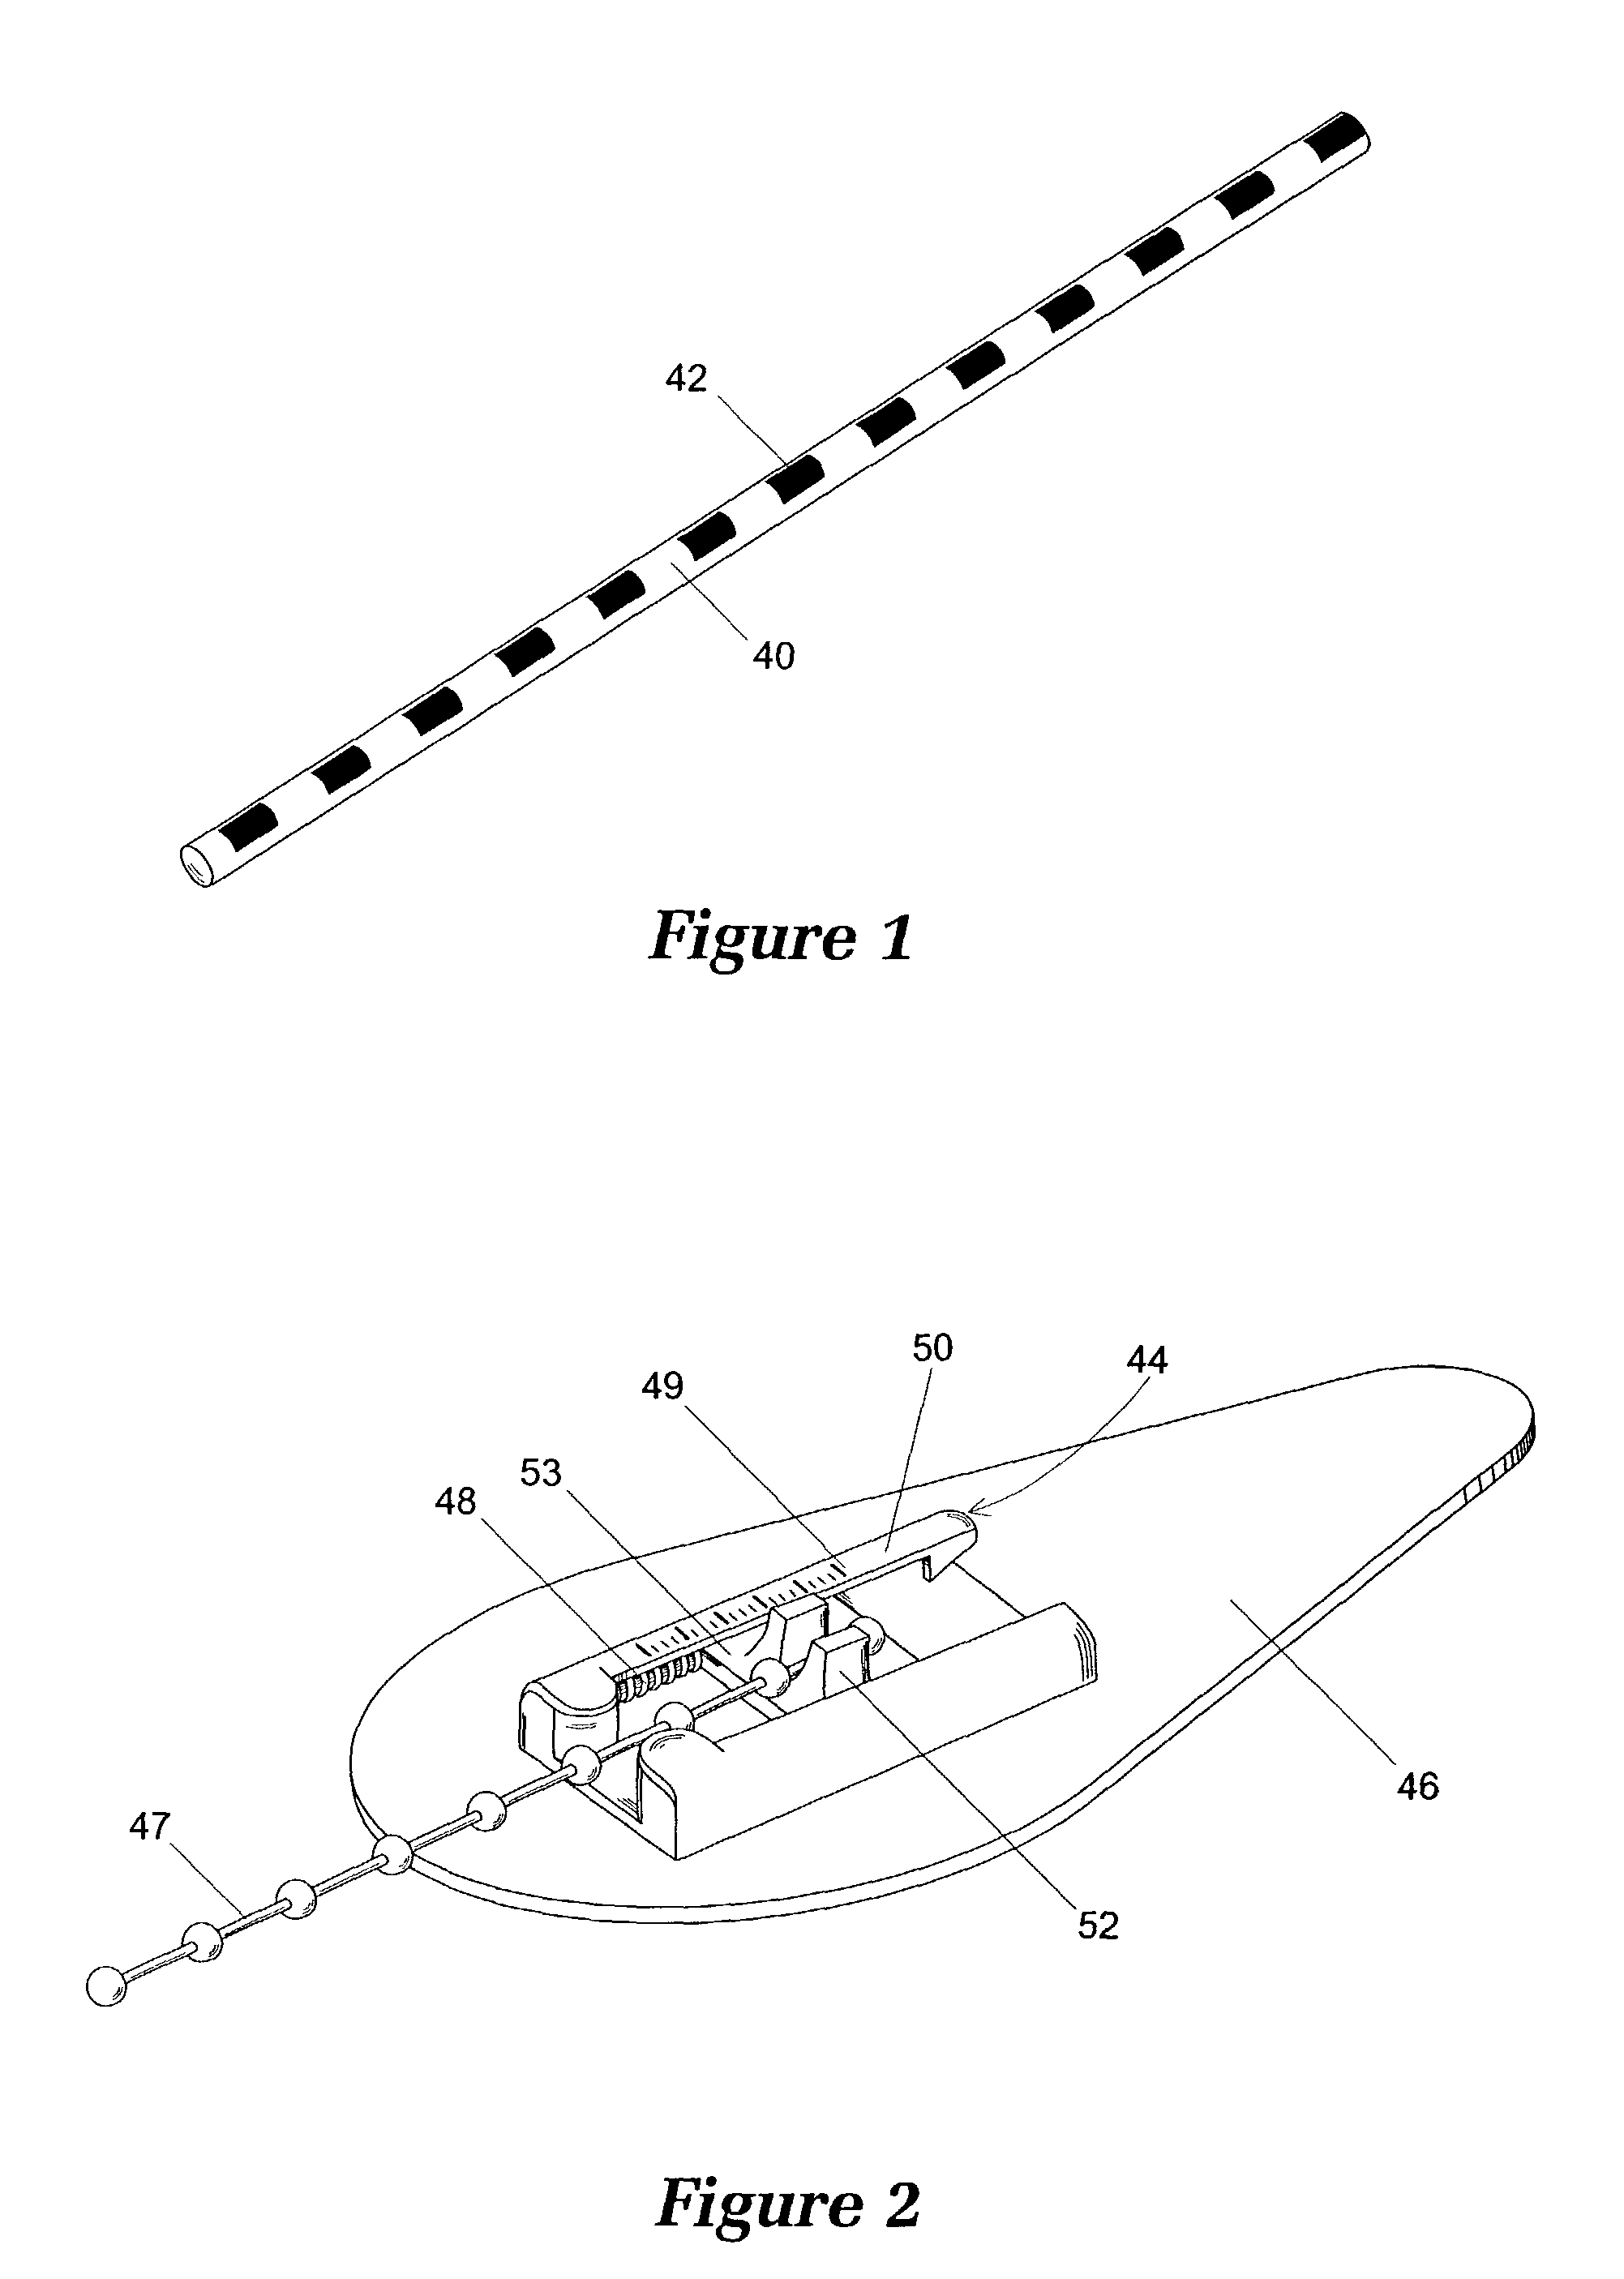 Clinical and surgical system and method for moving and stretching plastic tissue